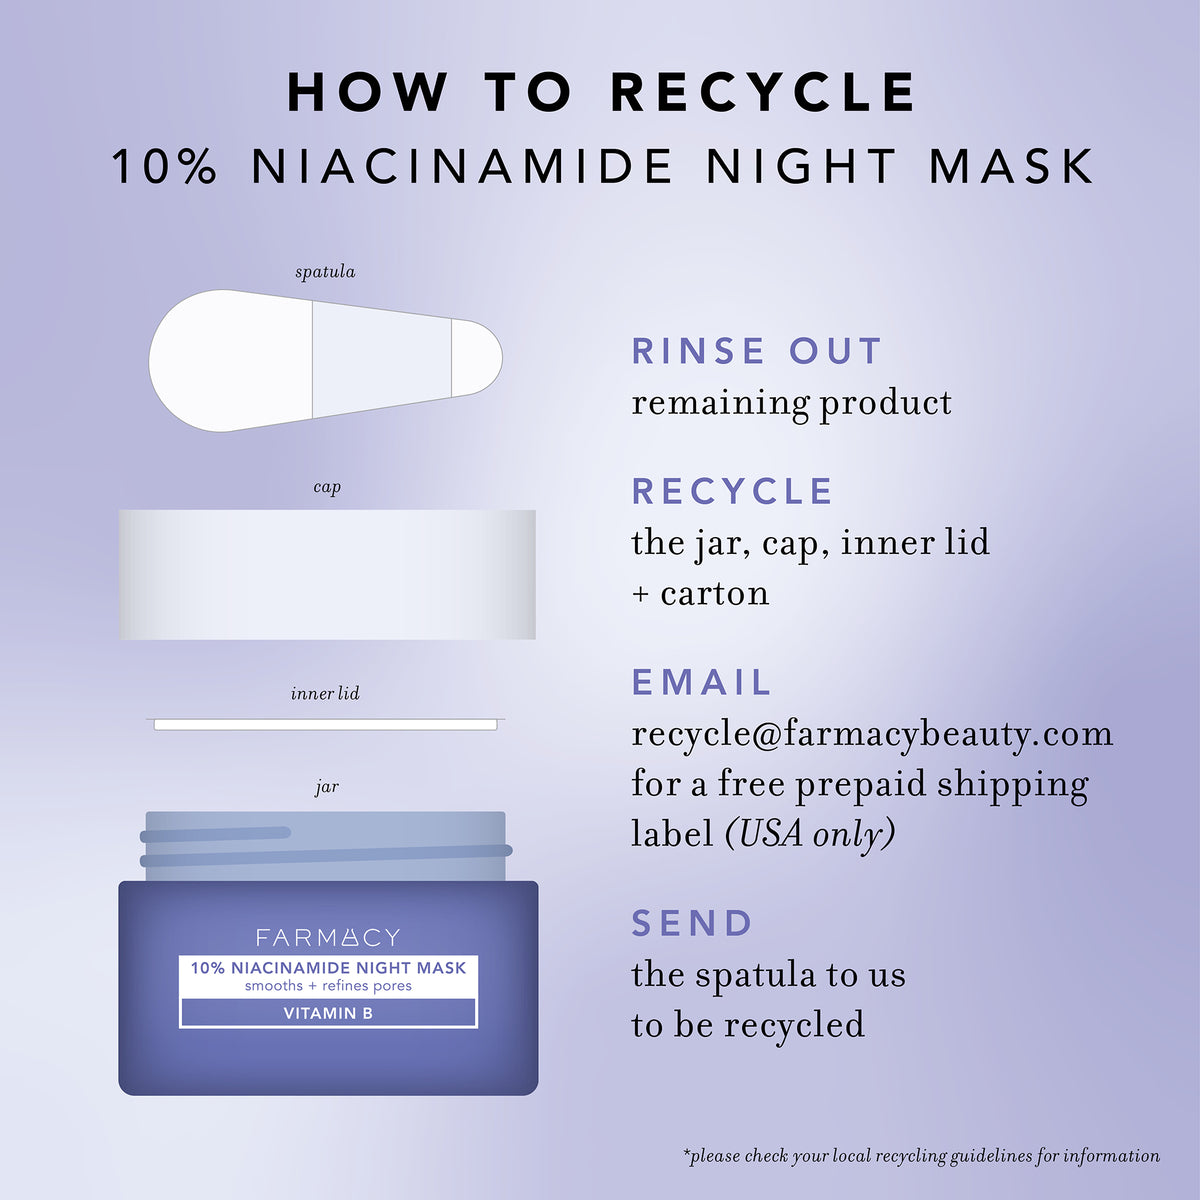 How to recycle Niacinamide